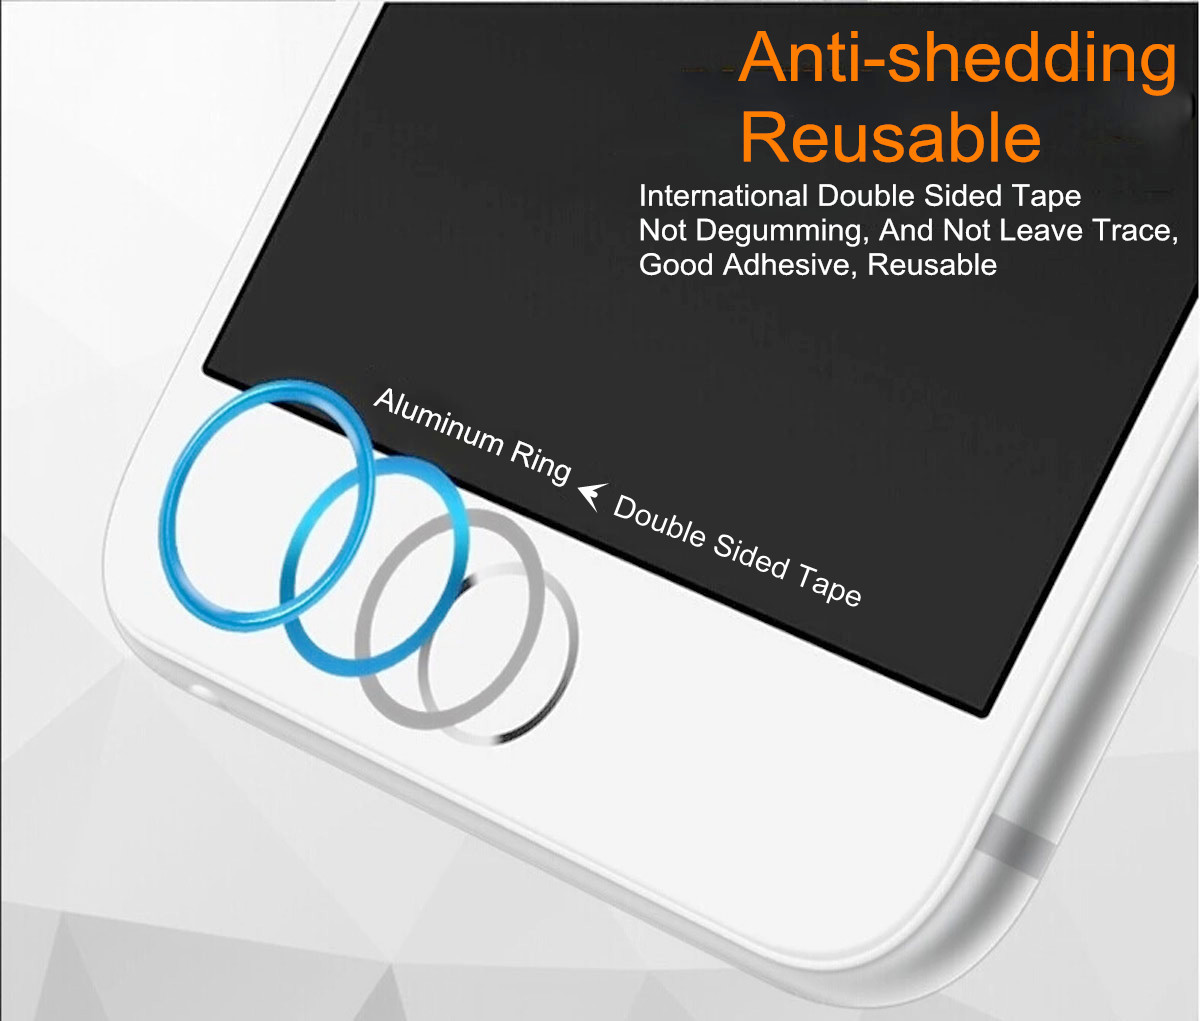 Aluminum-Alloy-Home-Button-Circle-Ring-Cover-Skin-Sticker-for-iPhone-5-5S-SE-66s-Plus-1185962